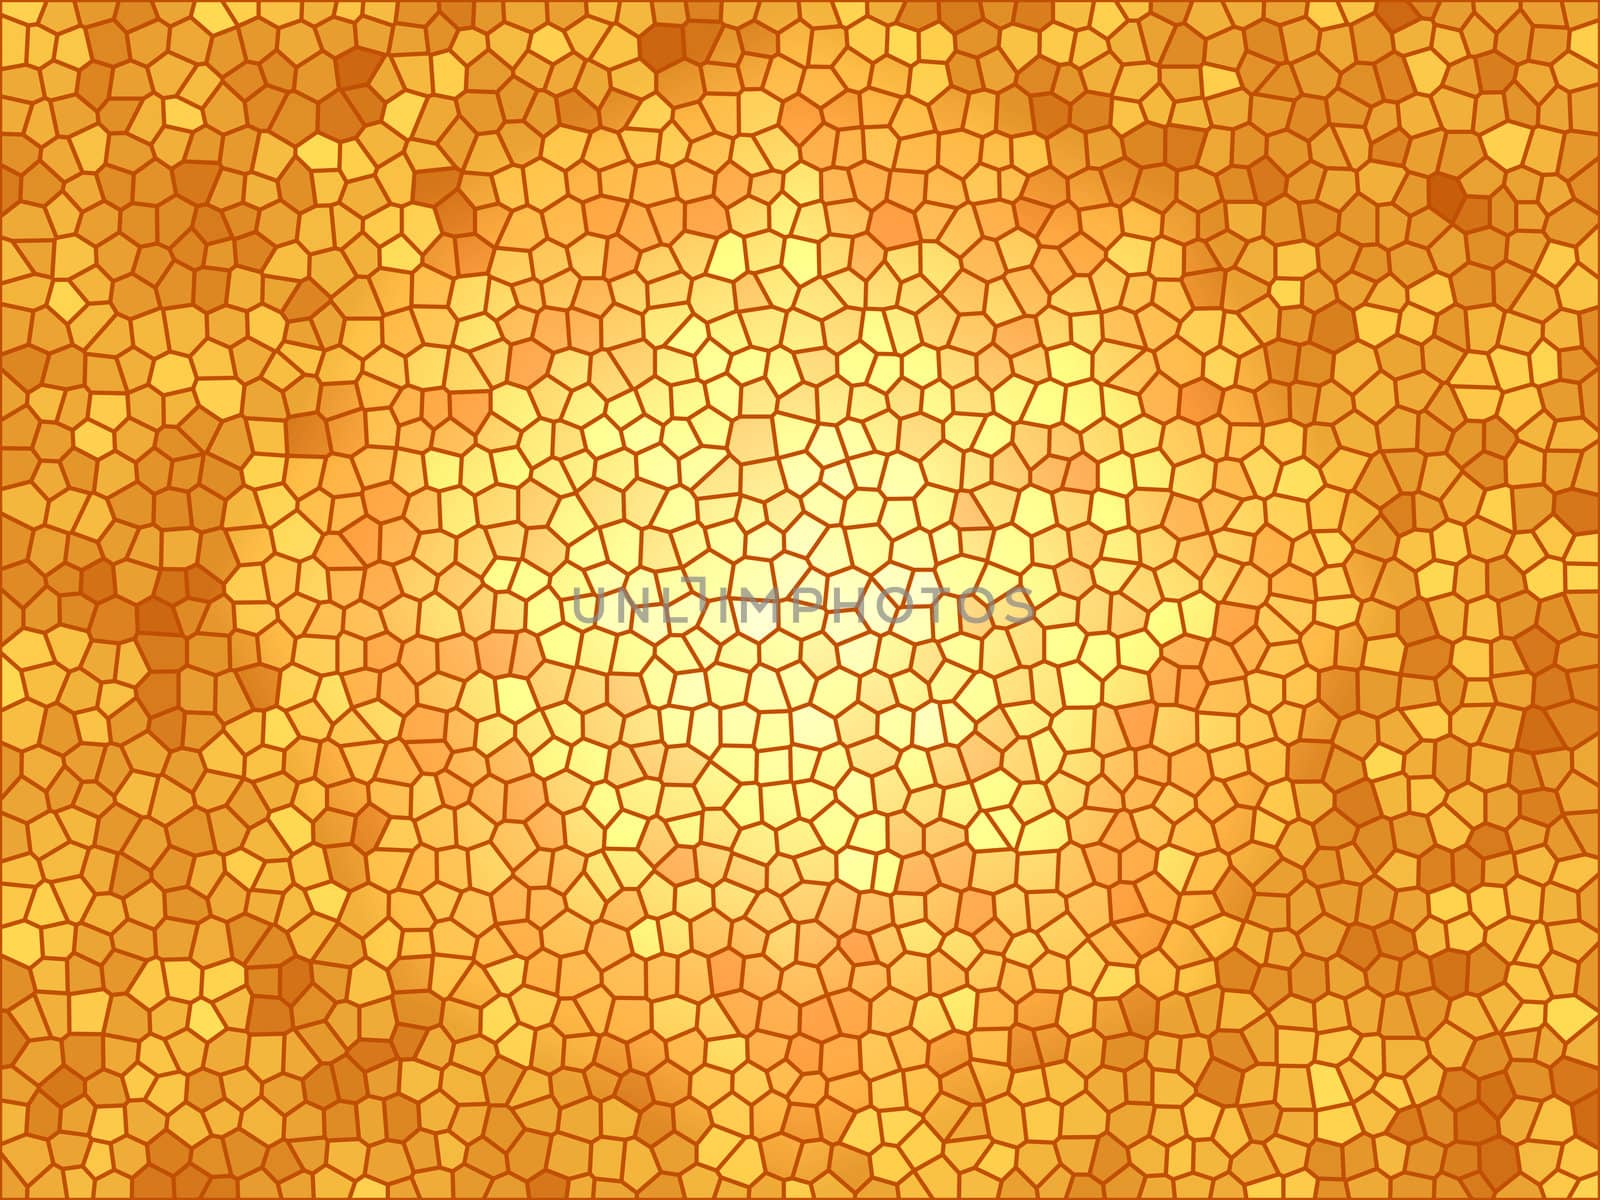 abstract yellow background illustration with seamless shapes